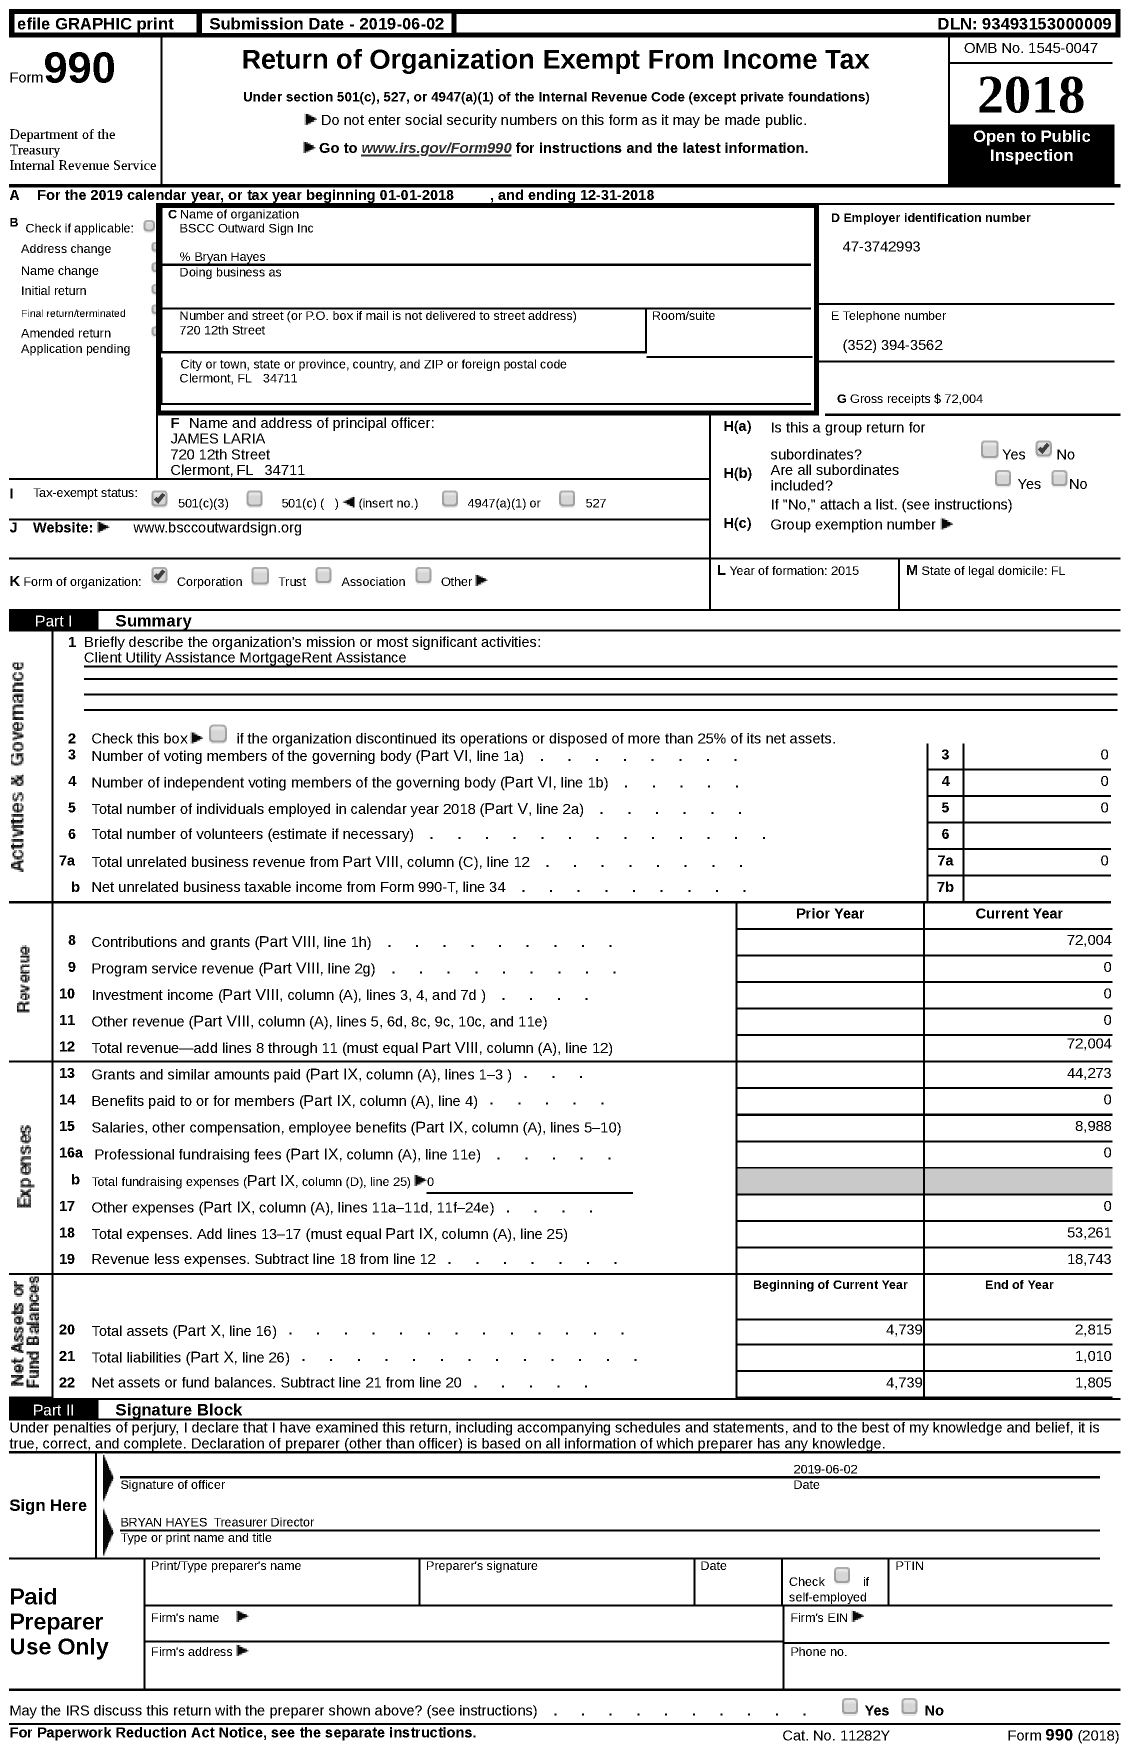 Image of first page of 2018 Form 990 for BSCC Outward Sign